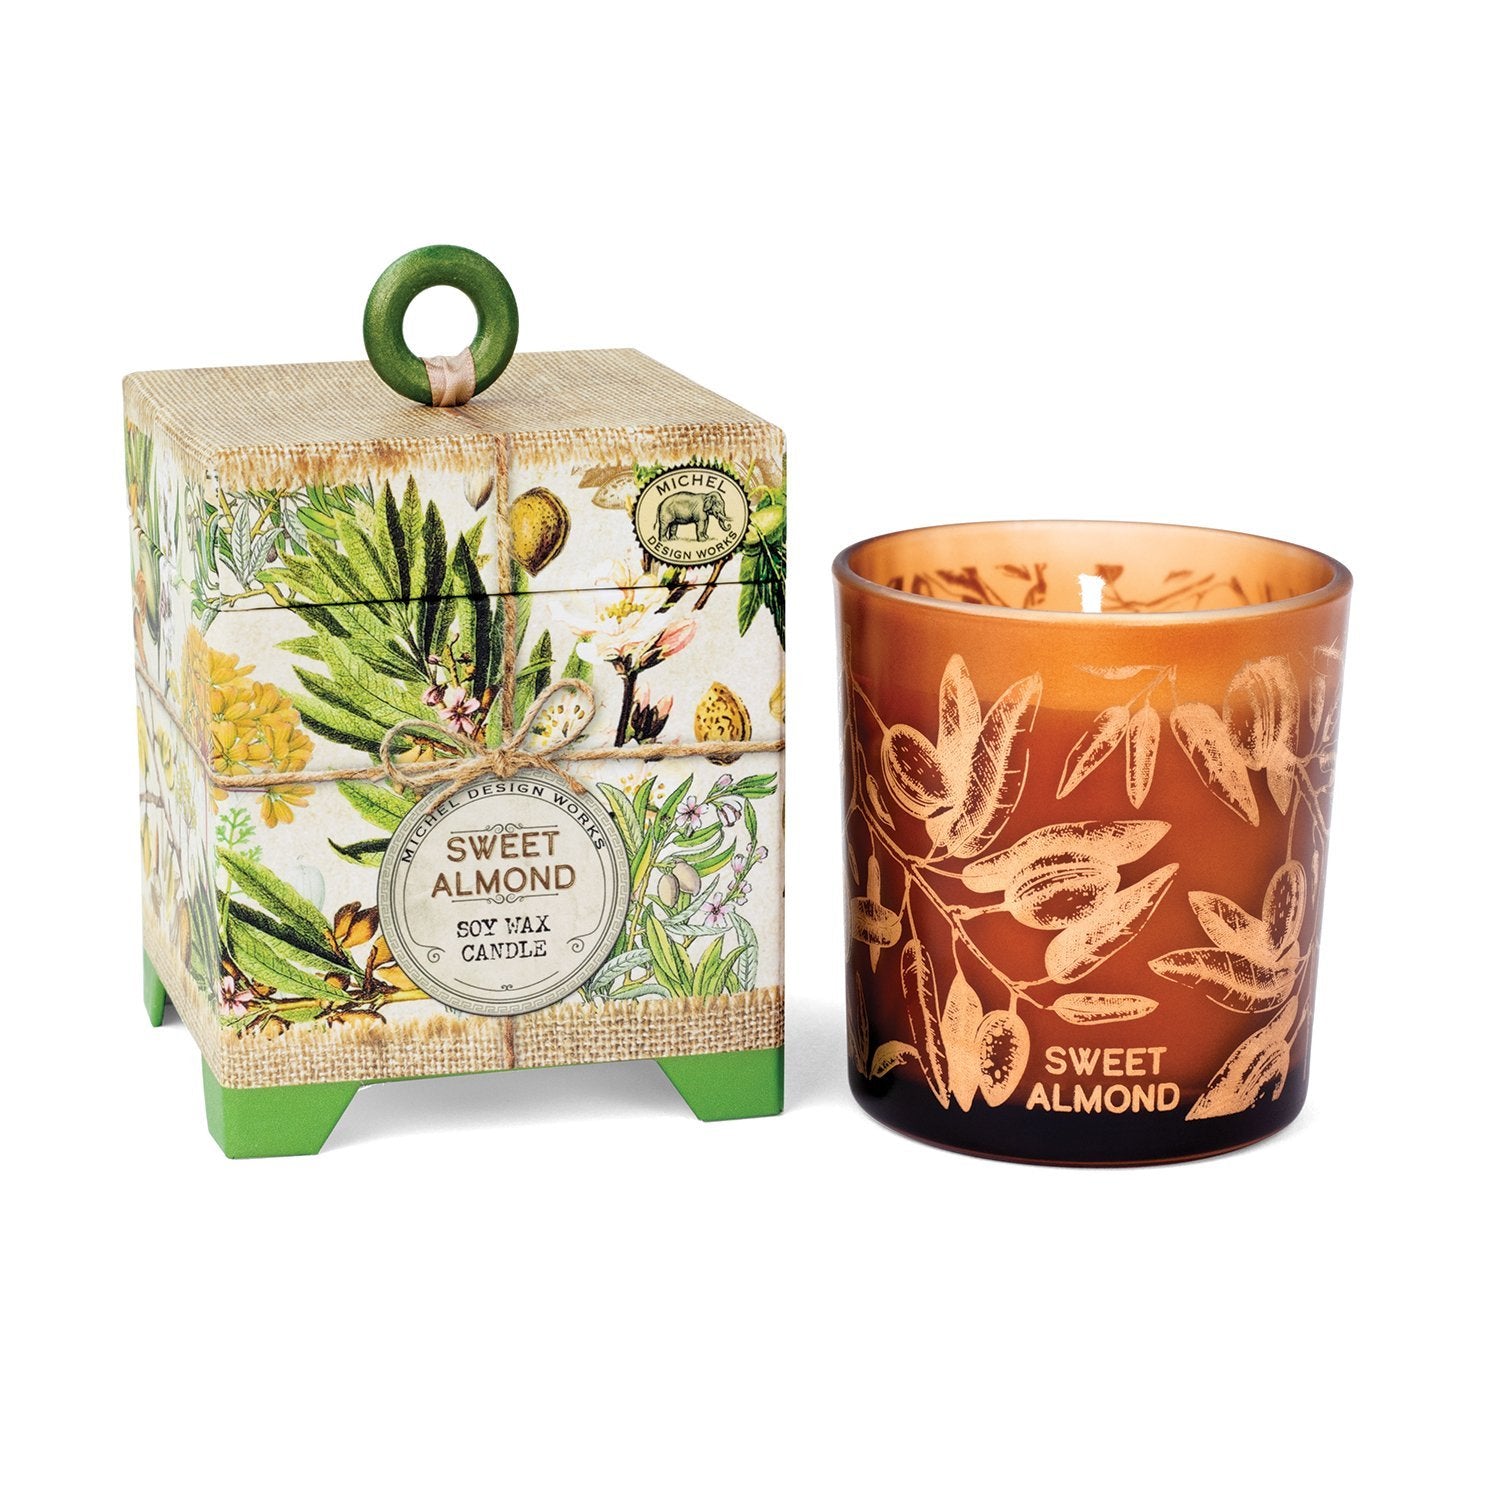 Michel Design Works Soy Wax Candle - 6.5 oz. - Sweet Almond